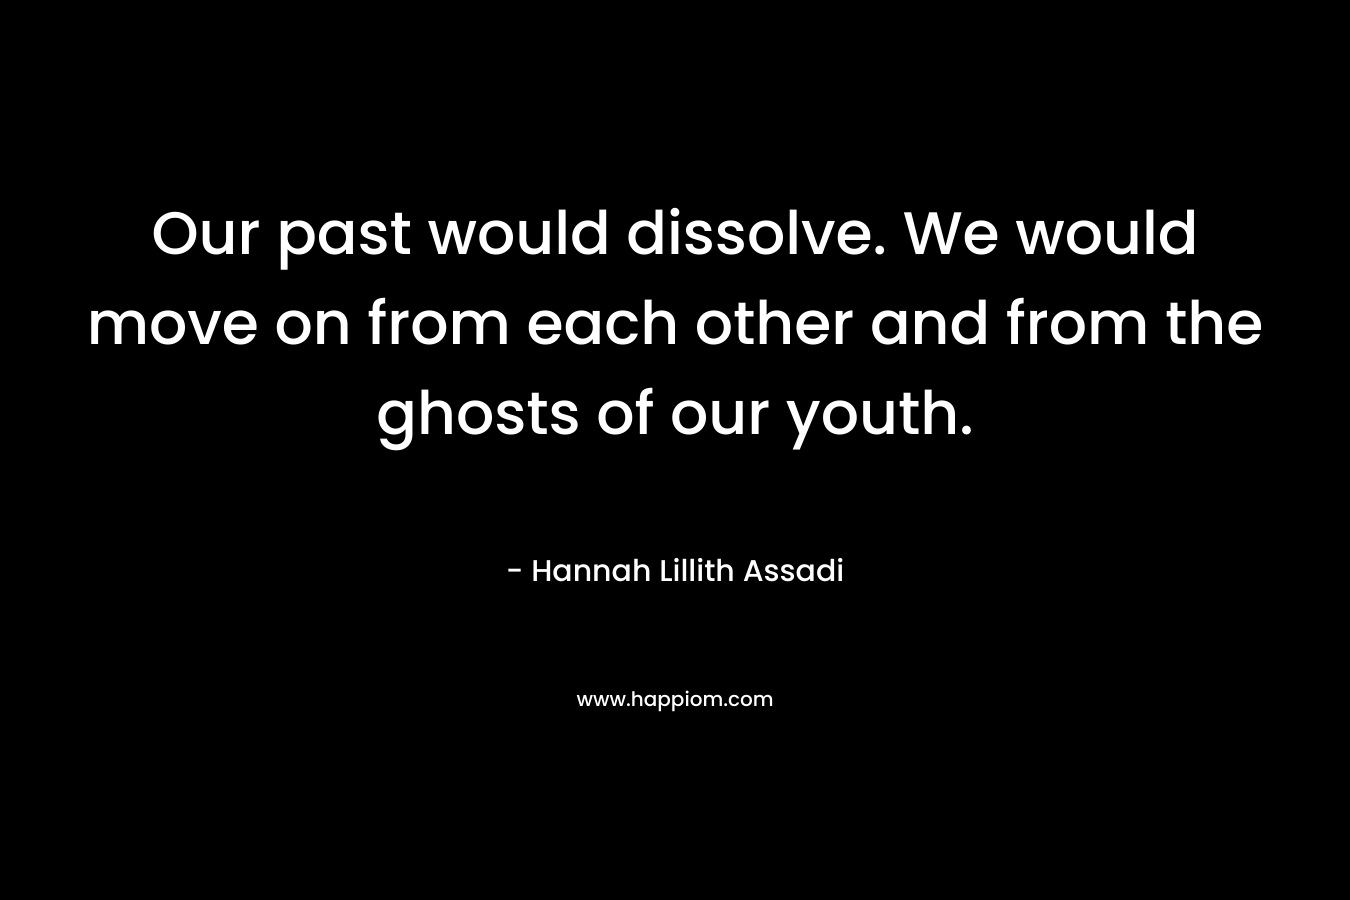 Our past would dissolve. We would move on from each other and from the ghosts of our youth.